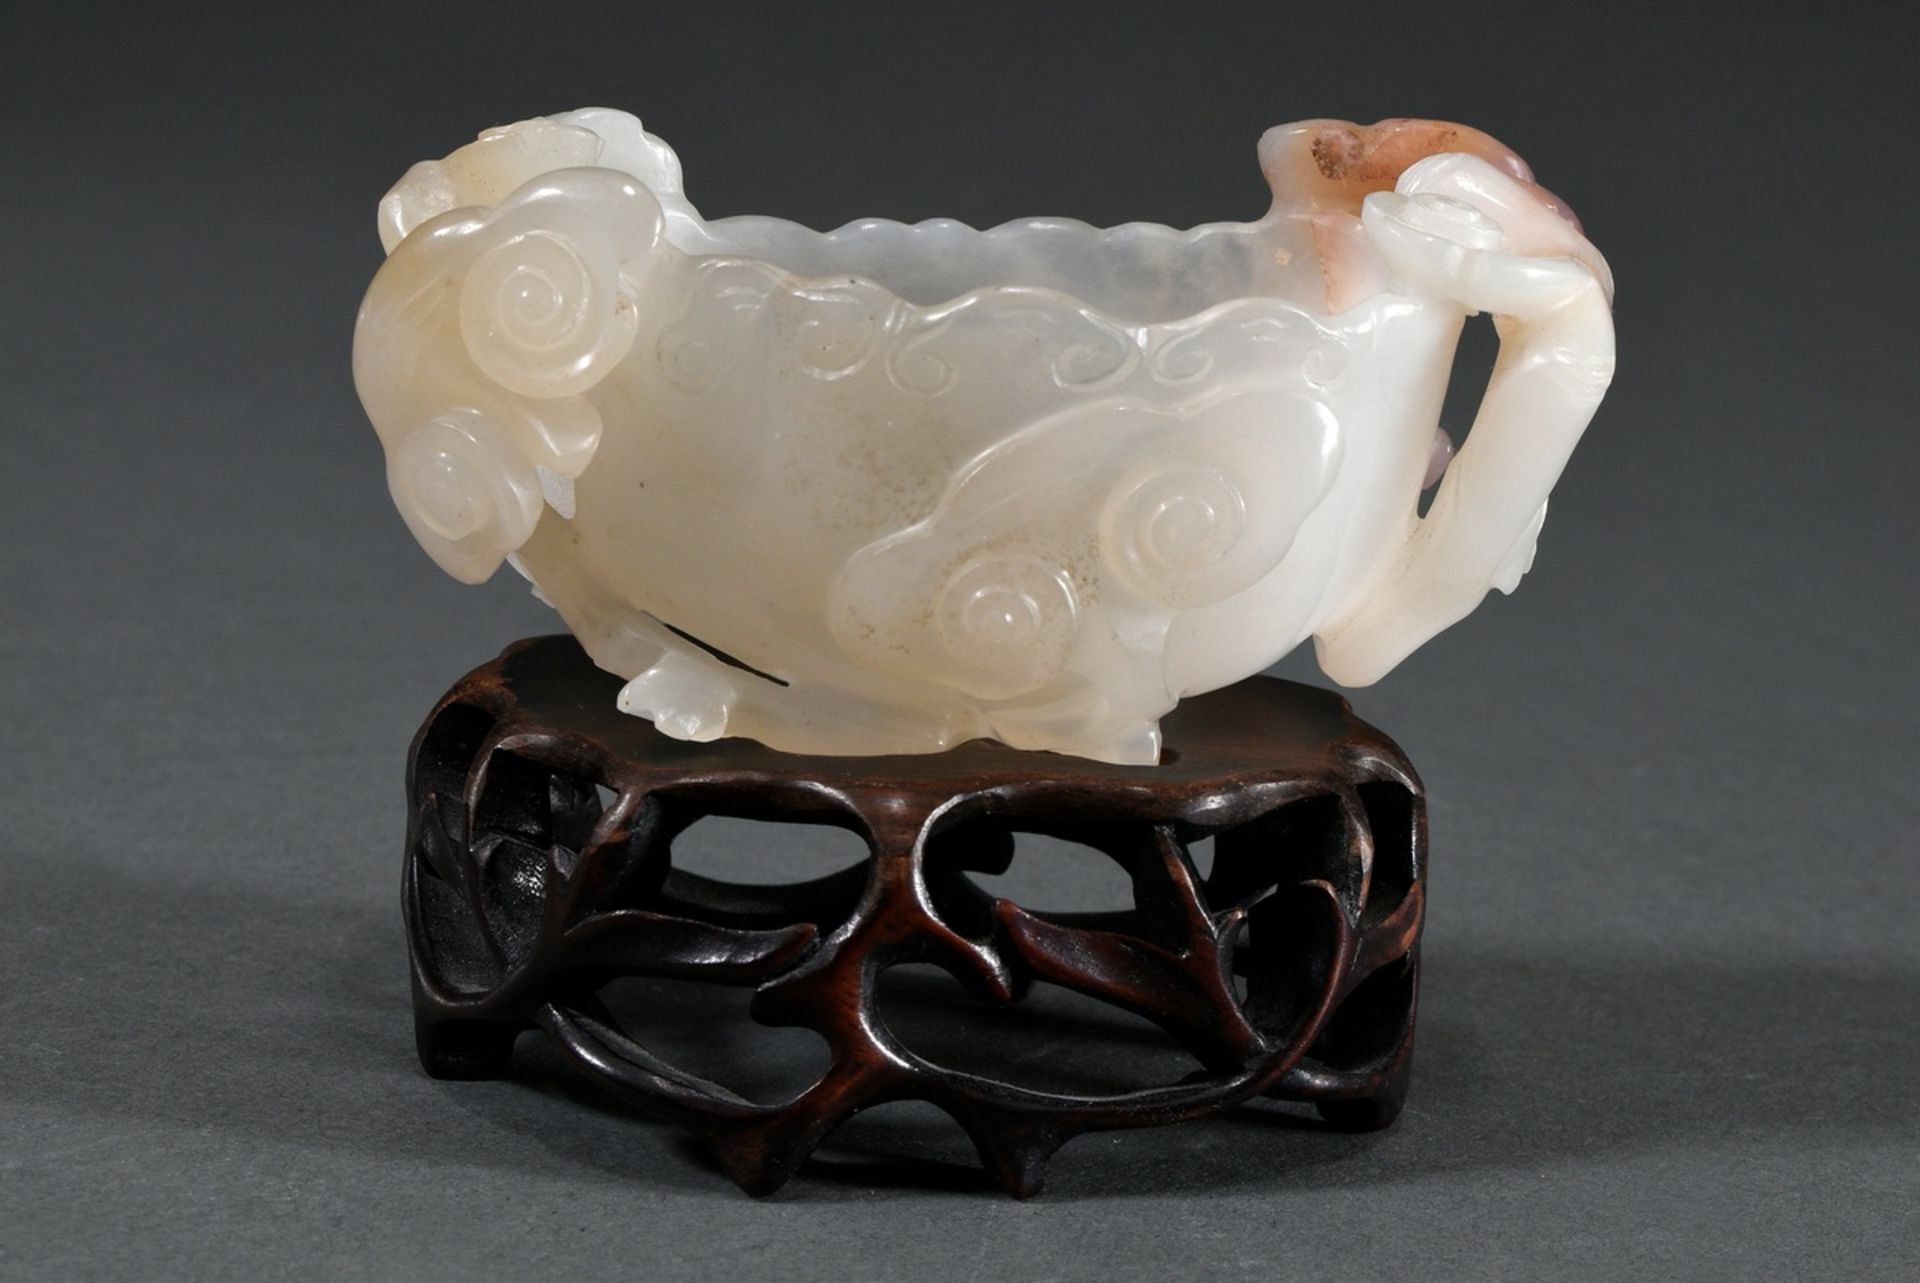 Light rose coloured jade brush washer with "Lingzhi mushrooms" on carved wooden base, 4,5x10x5cm, s - Image 2 of 5